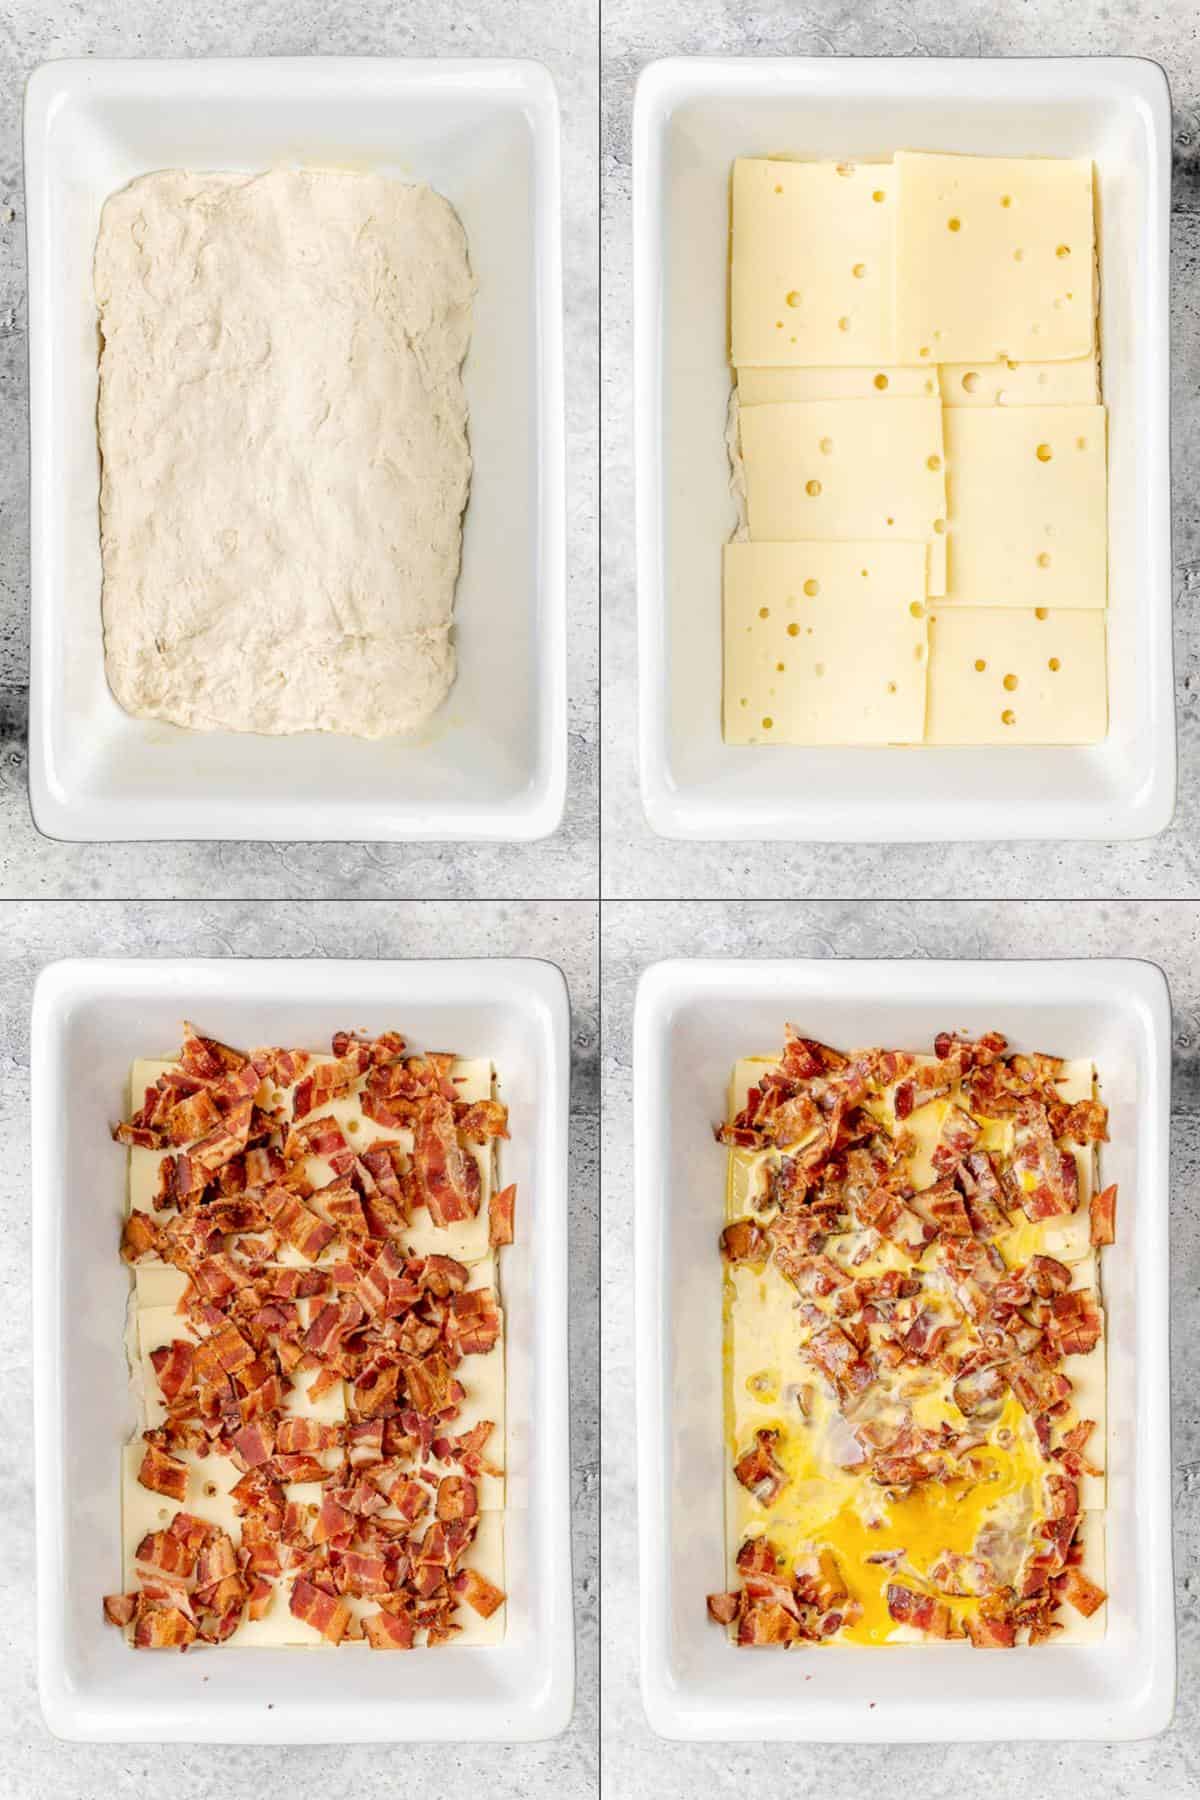 Collage of layering dough, Swiss cheese, bacon, and sauce in a baking dish.